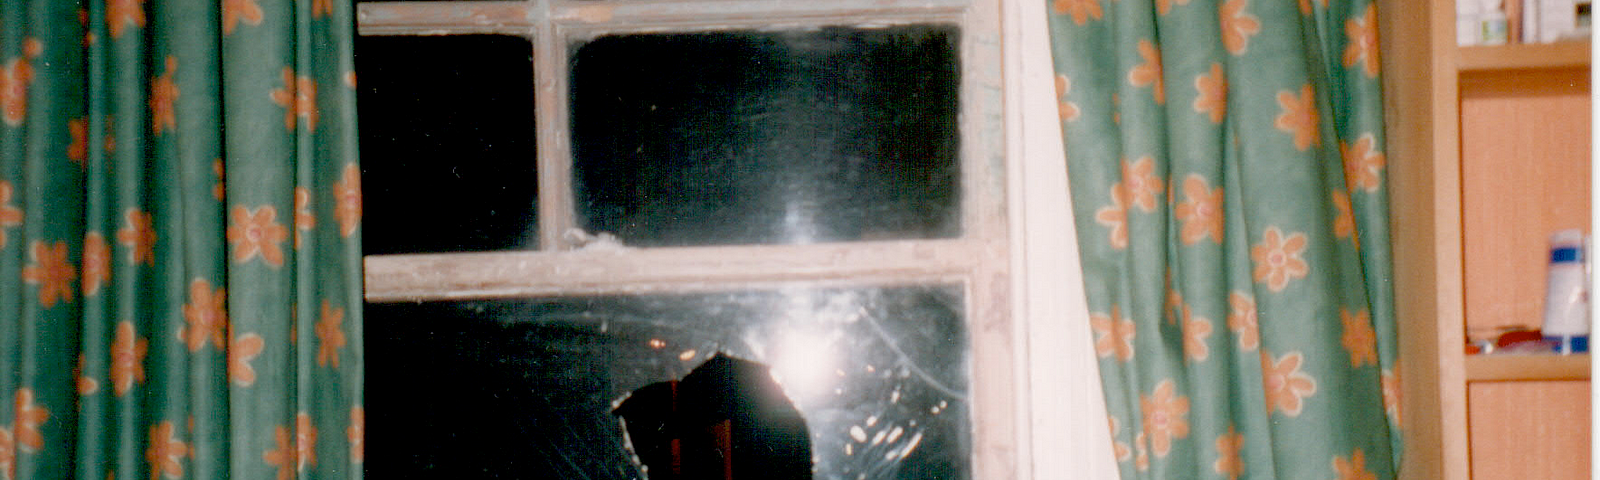 A broken window pane. There is a large hole in the window surrounded by cracks in the shatter-proof glass.